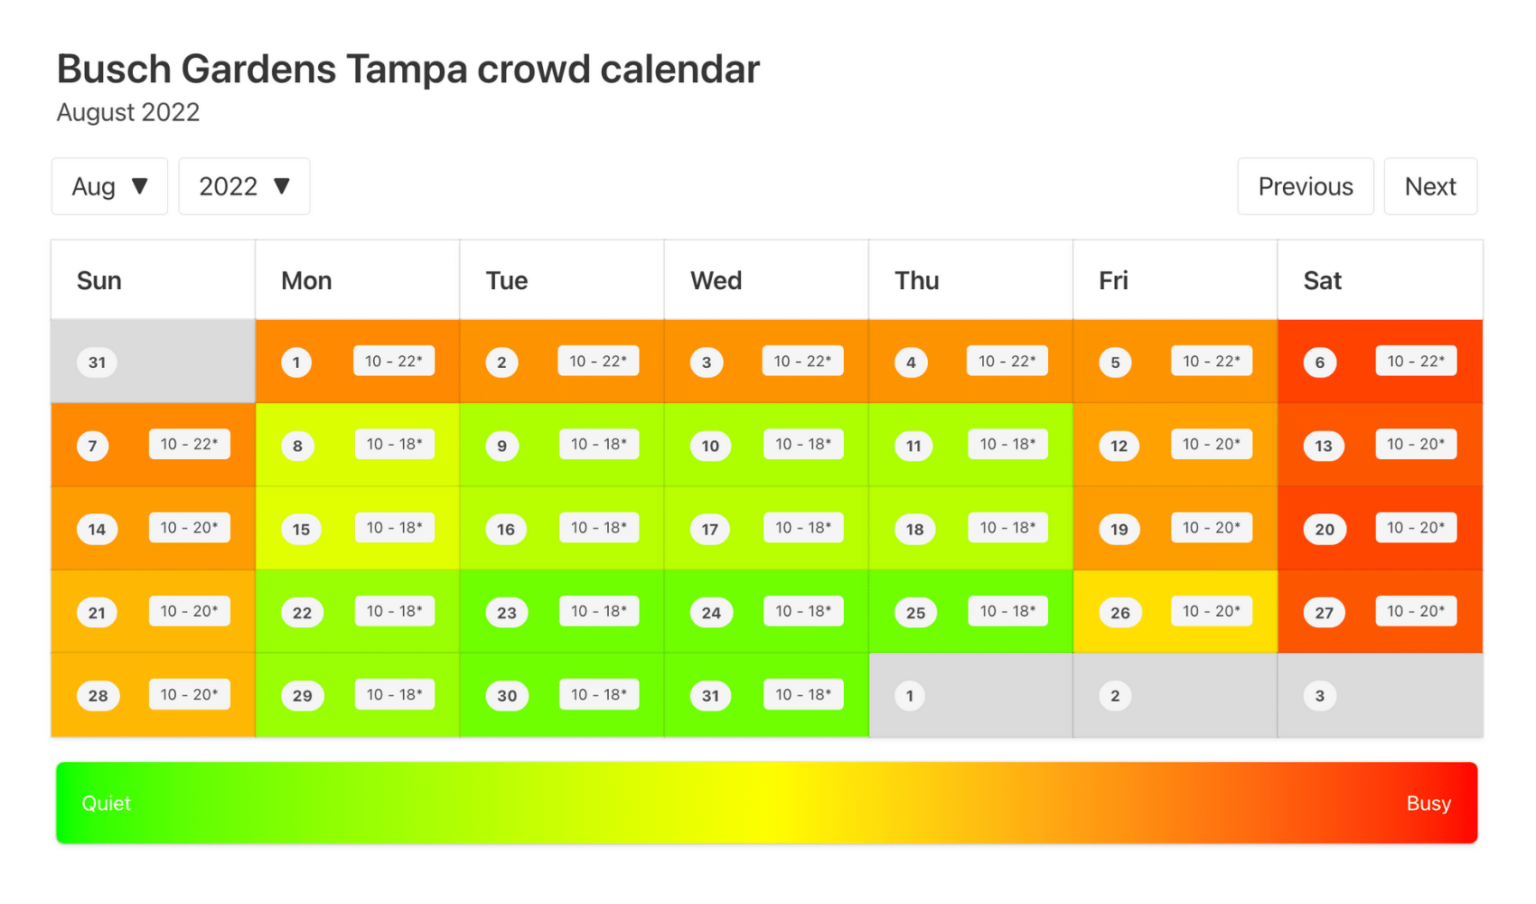 busch-gardens-tampa-crowd-calendar-avoid-the-busy-days-themeparkhipster